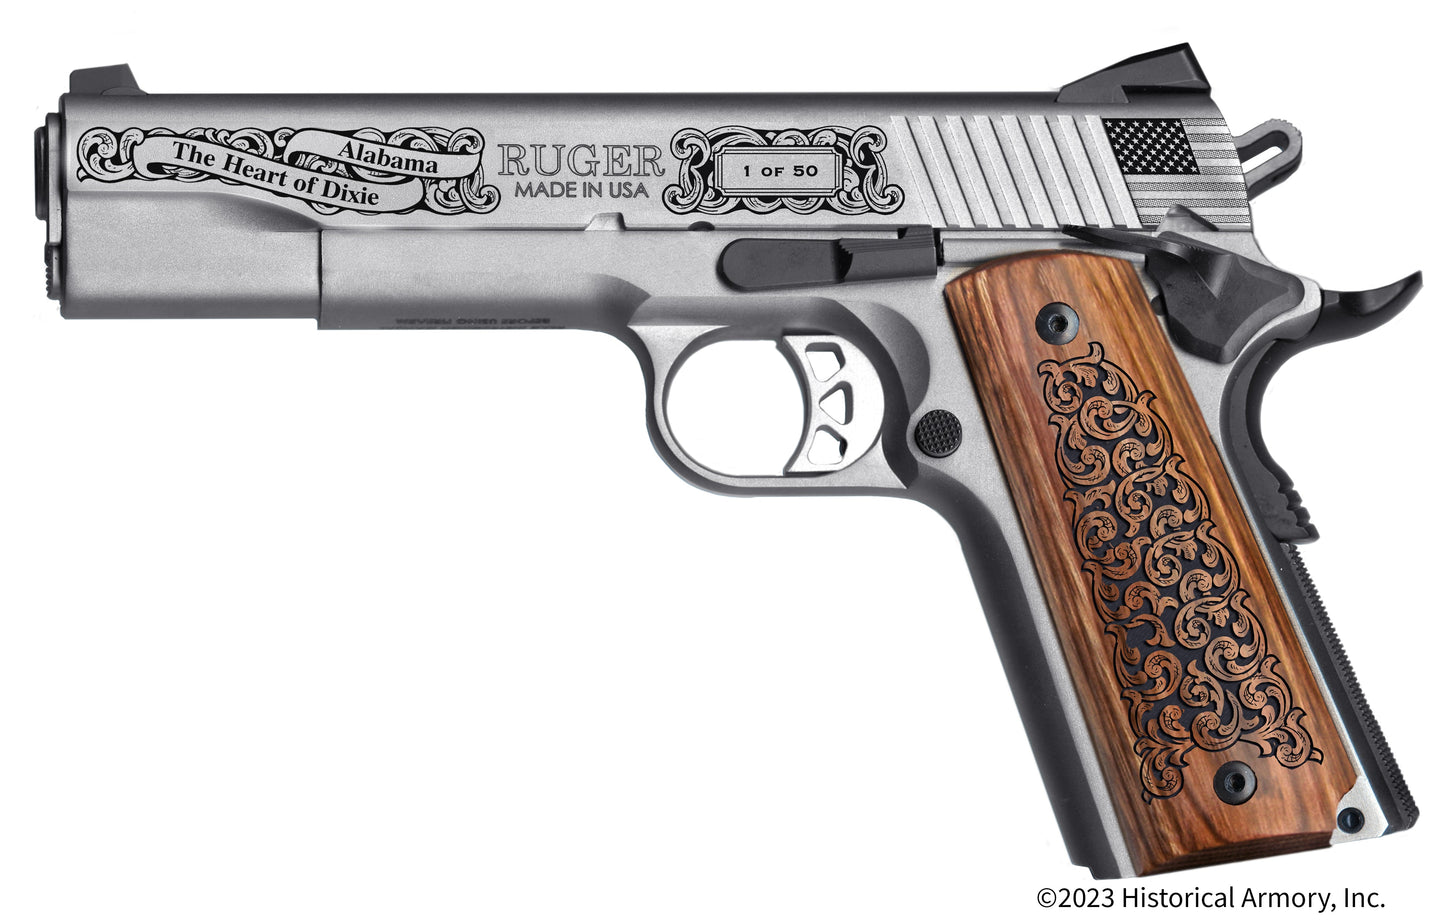 Etowah  County Alabama Engraved .45 Auto Ruger 1911